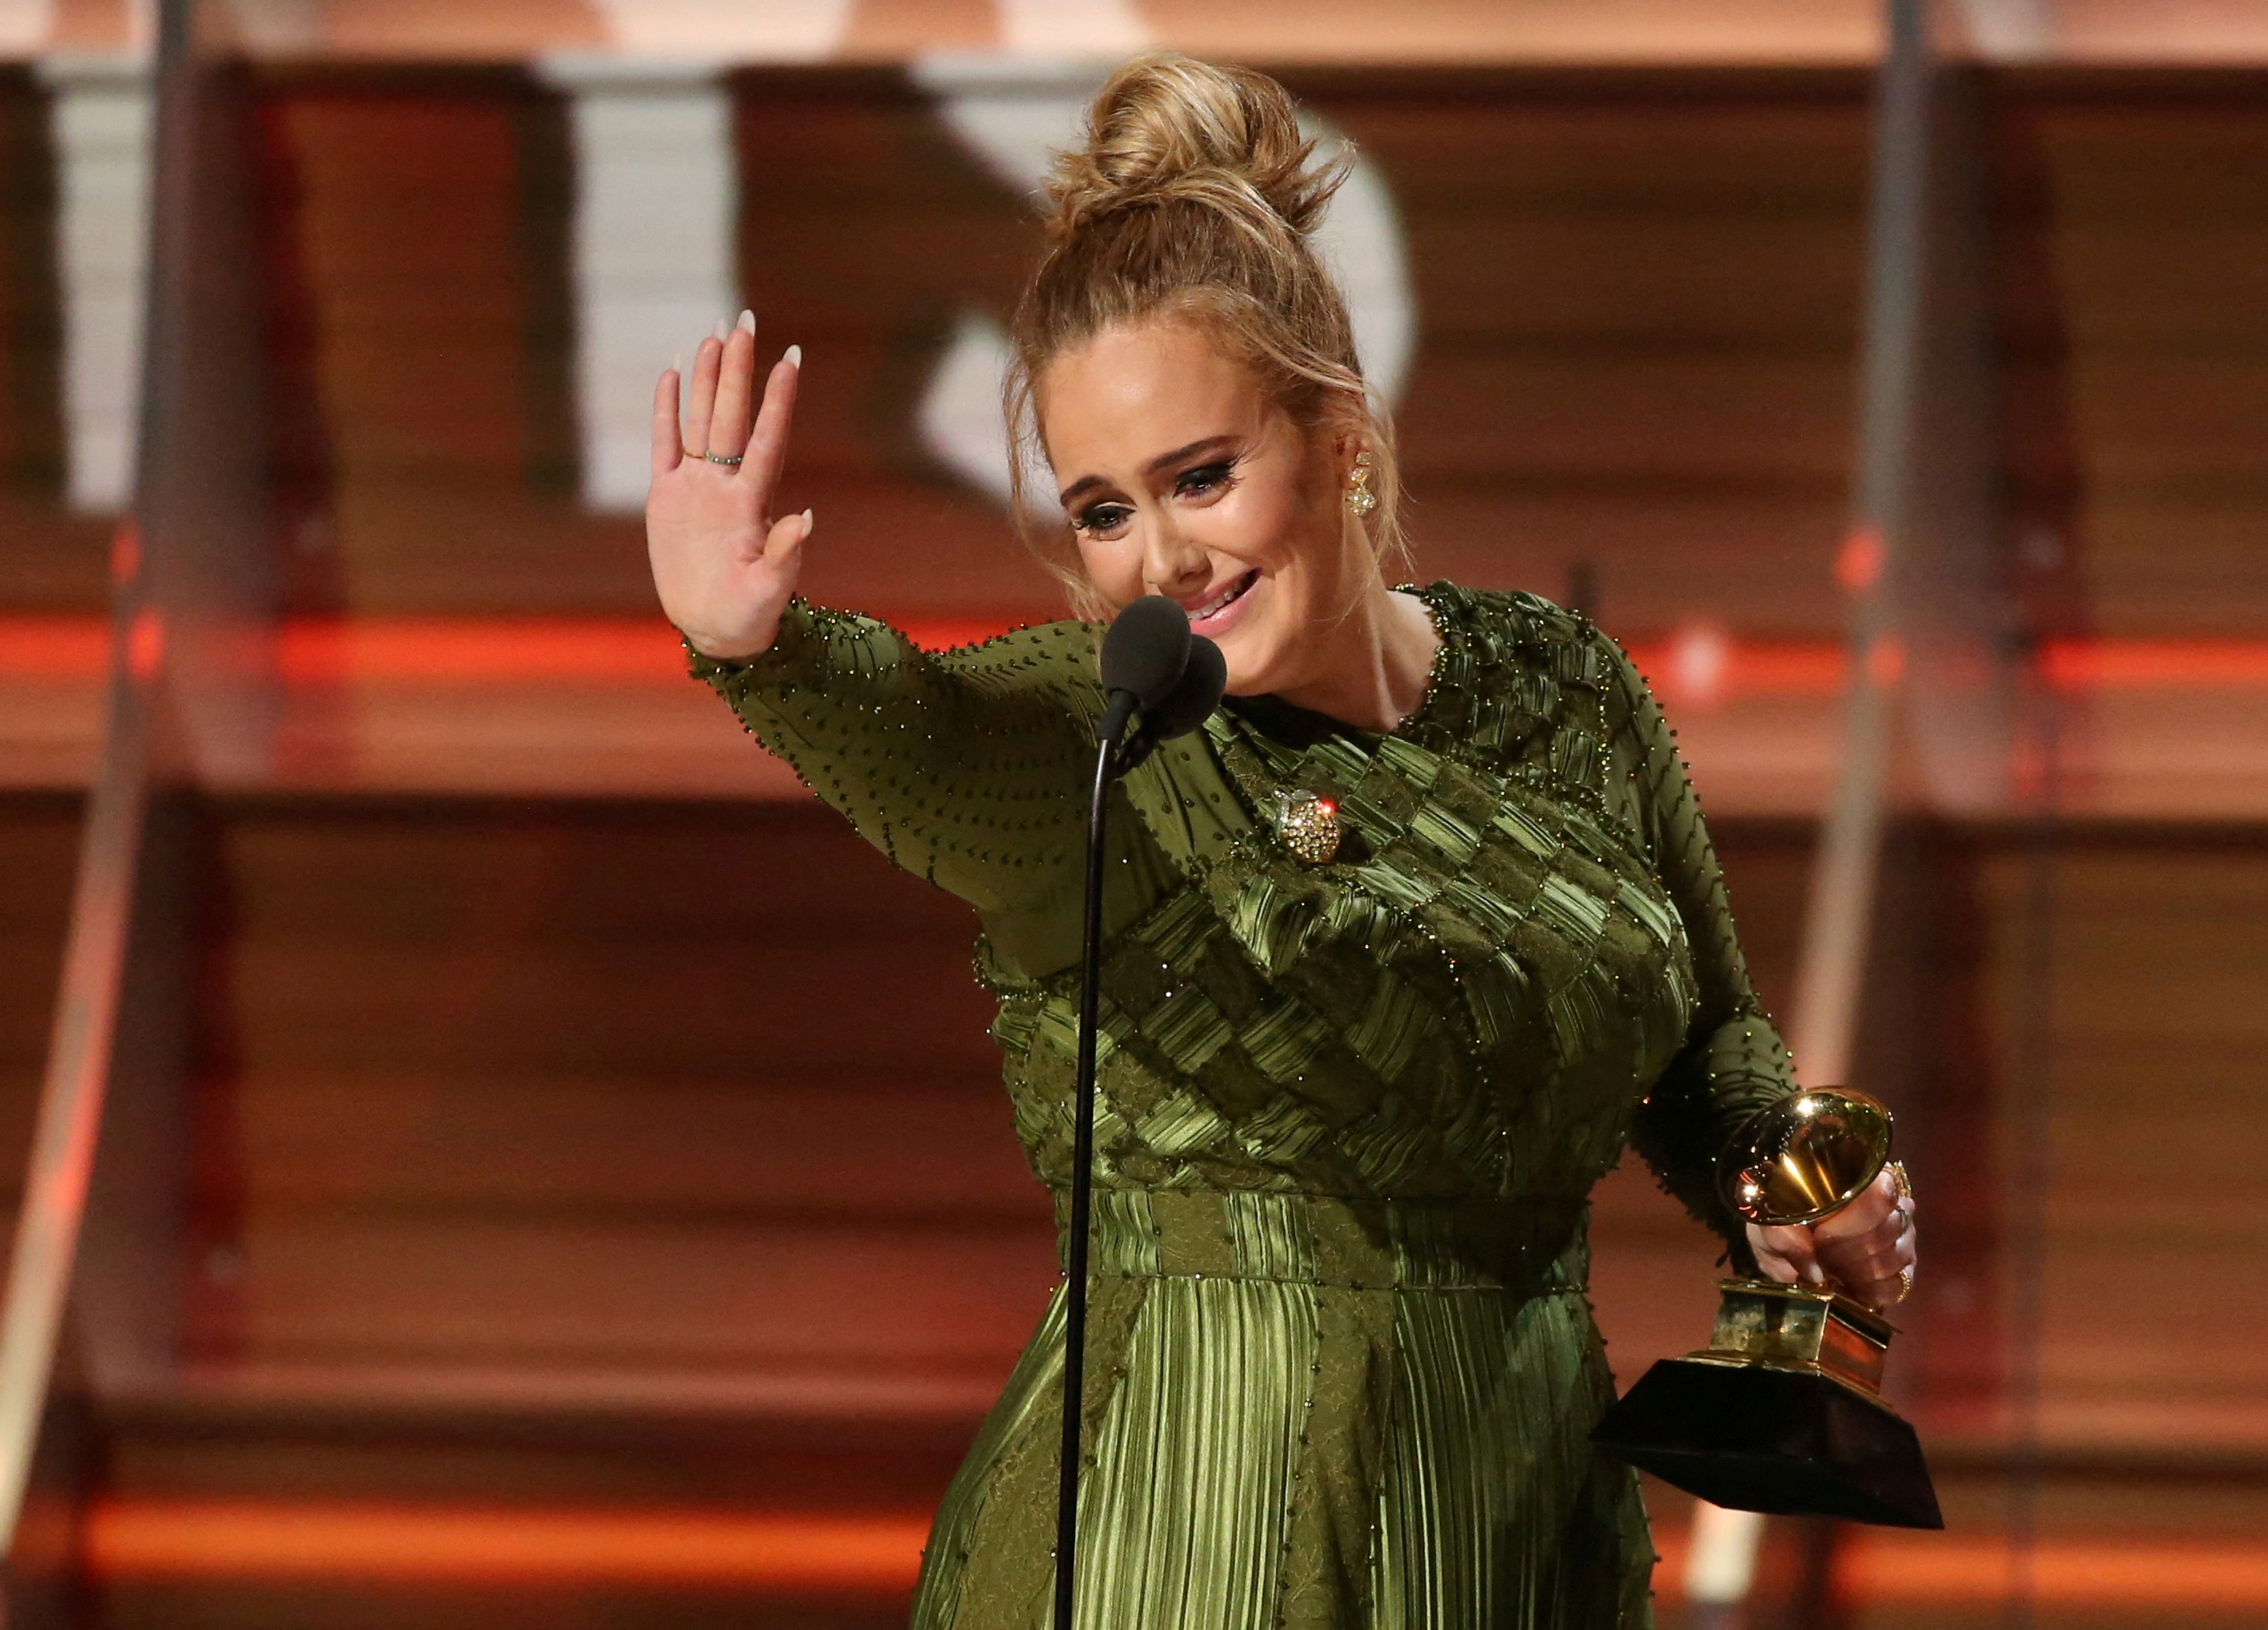 Adele and co-song writer Kurstin accept the Grammy for Song of the Year for 